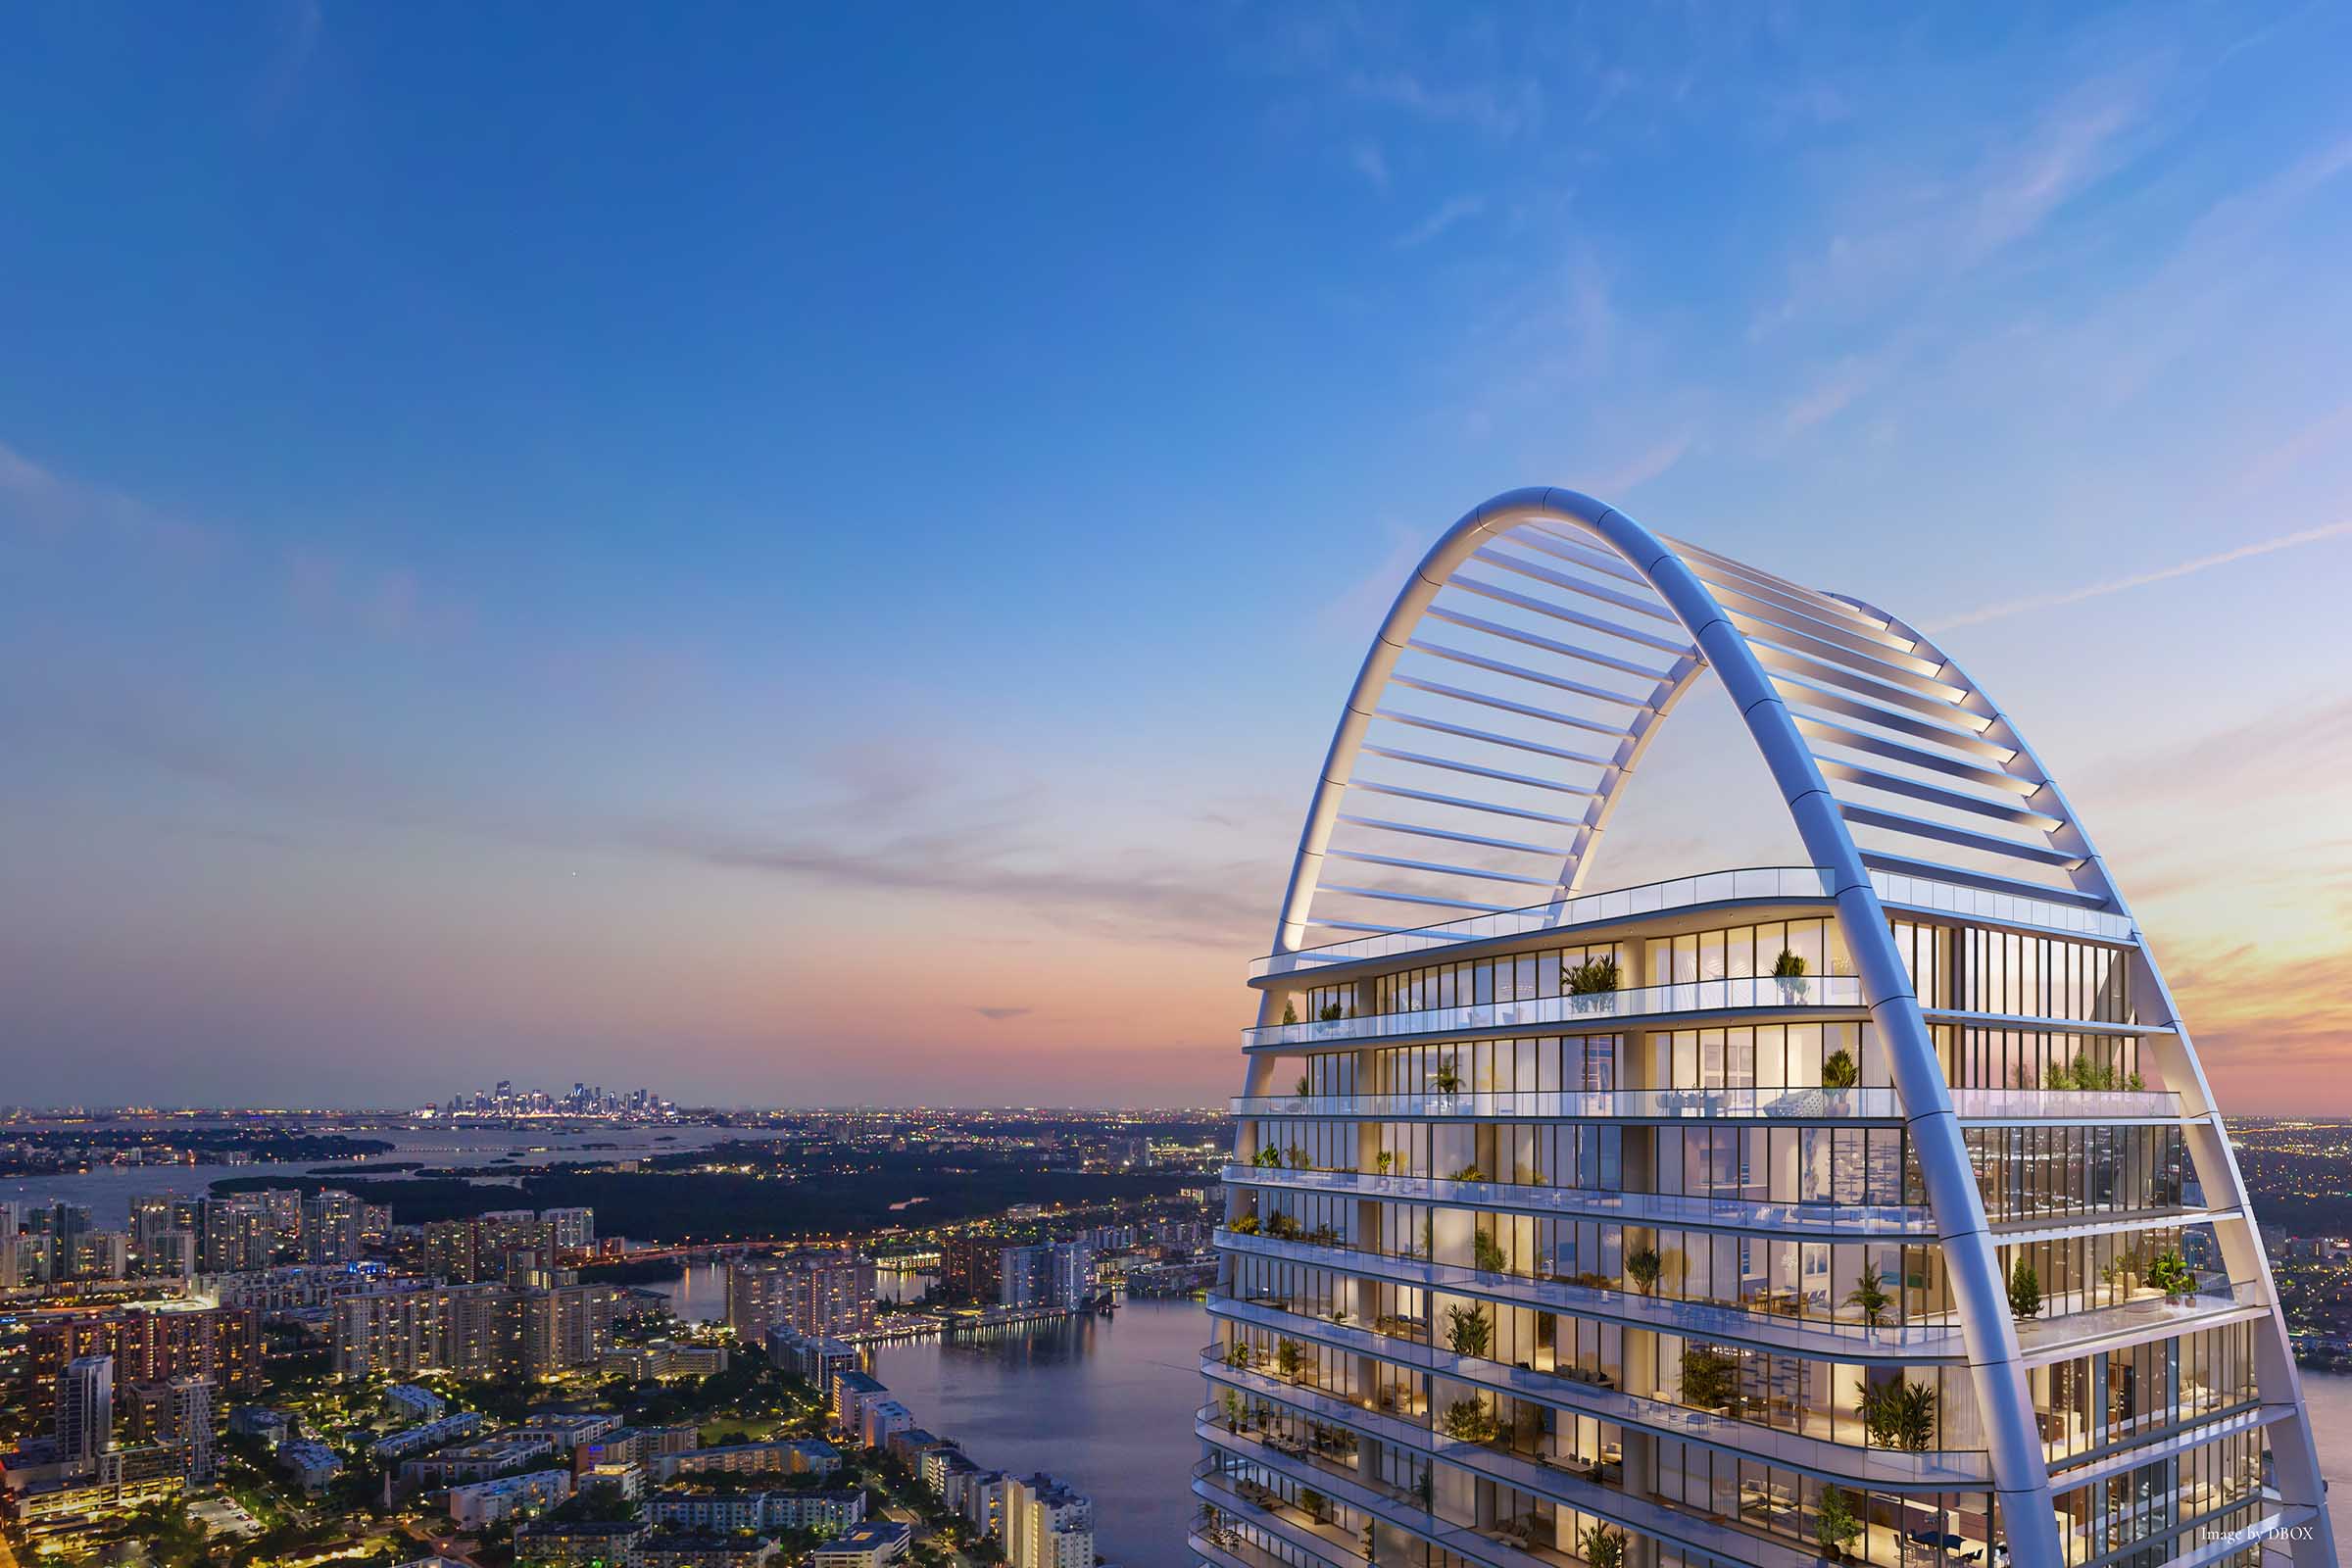 St Regis Sunny Isles Prepares For Groundbreaking With $750 Million In Reservations